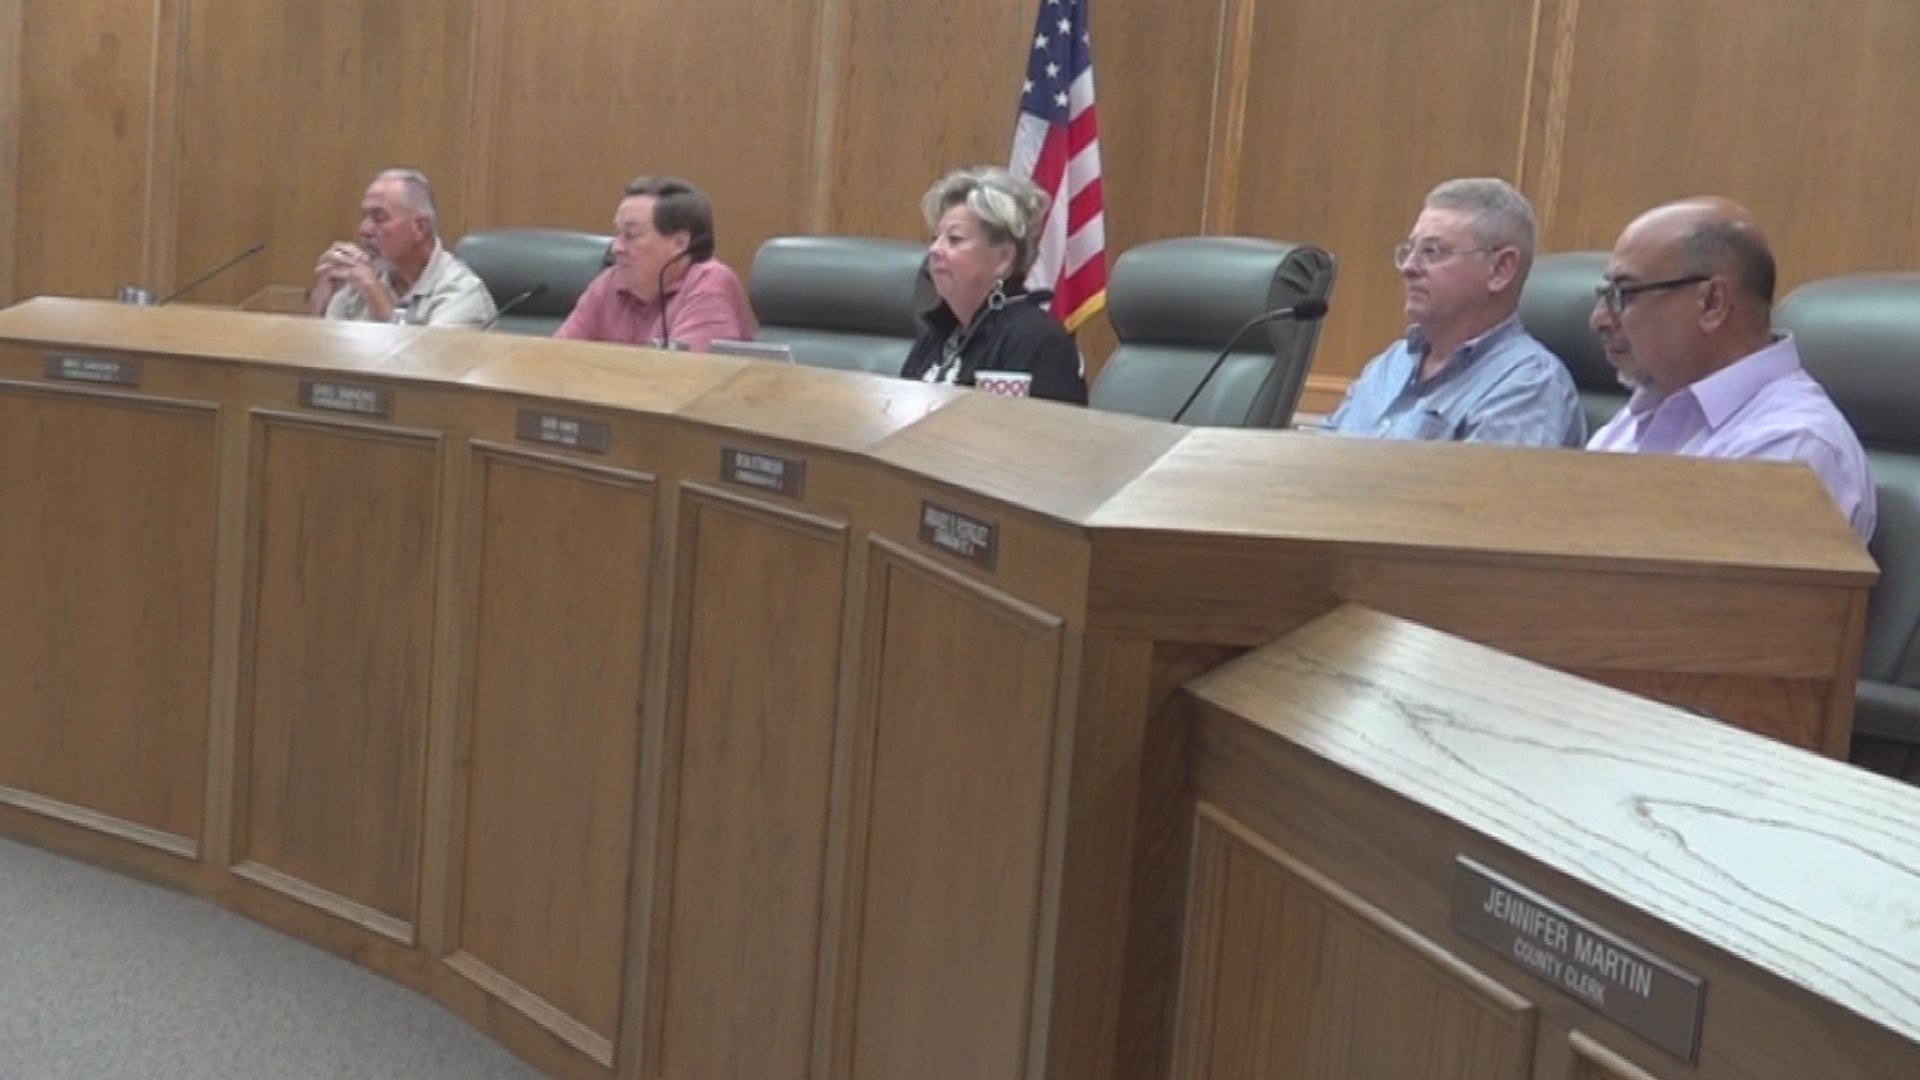 The Ector County commissioners made the decision 4 to 1 to make a Declaration of Local Disaster or a Resolution to Secure the Border.